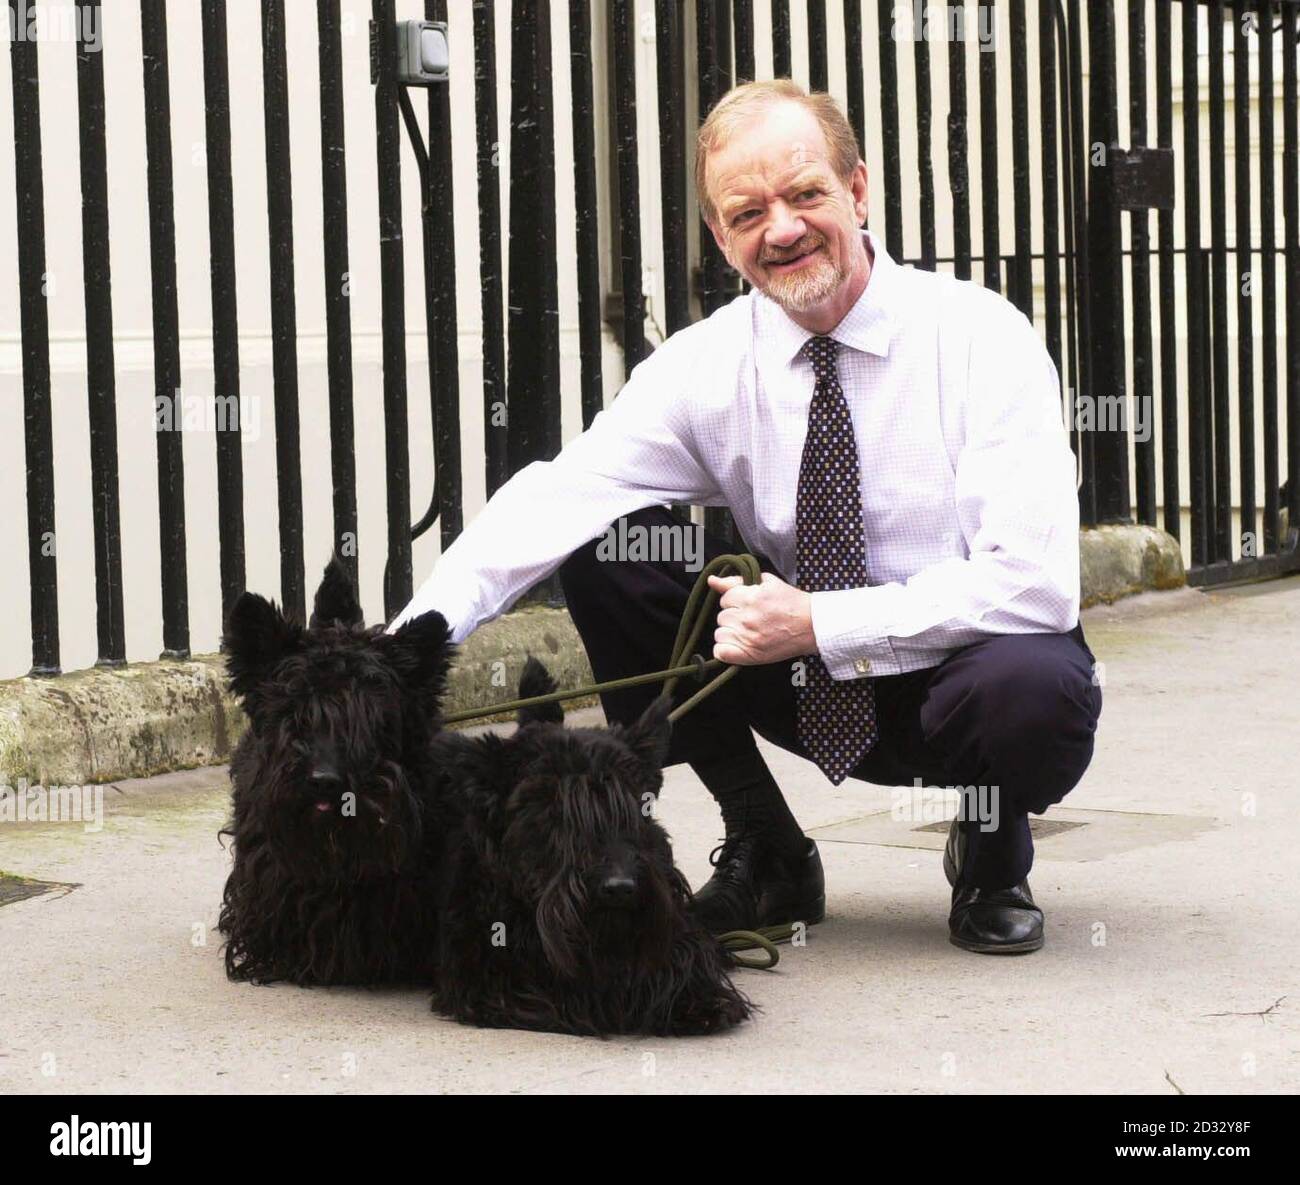 Former Leader of the House, Robin Cook, with his dogs Tammy and Tasker, outside the 'grace and favour' London residence he has been urged to leave.  *  Mr Cook has been criticised in some circles for maintaining 1 Carlton Terrace, where he has lived since becoming foreign secretary six years ago, after resigning his cabinet post. Alan Duncan, a Tory foreign affairs spokesman, has urged Tony Blair to evict Mr Cook from the   5-7 million flat immediately. But the Prime Minister's official spokesman said Mr Blair decided Mr Cook could stay until he has found other accomodation.  It is understood  Stock Photo